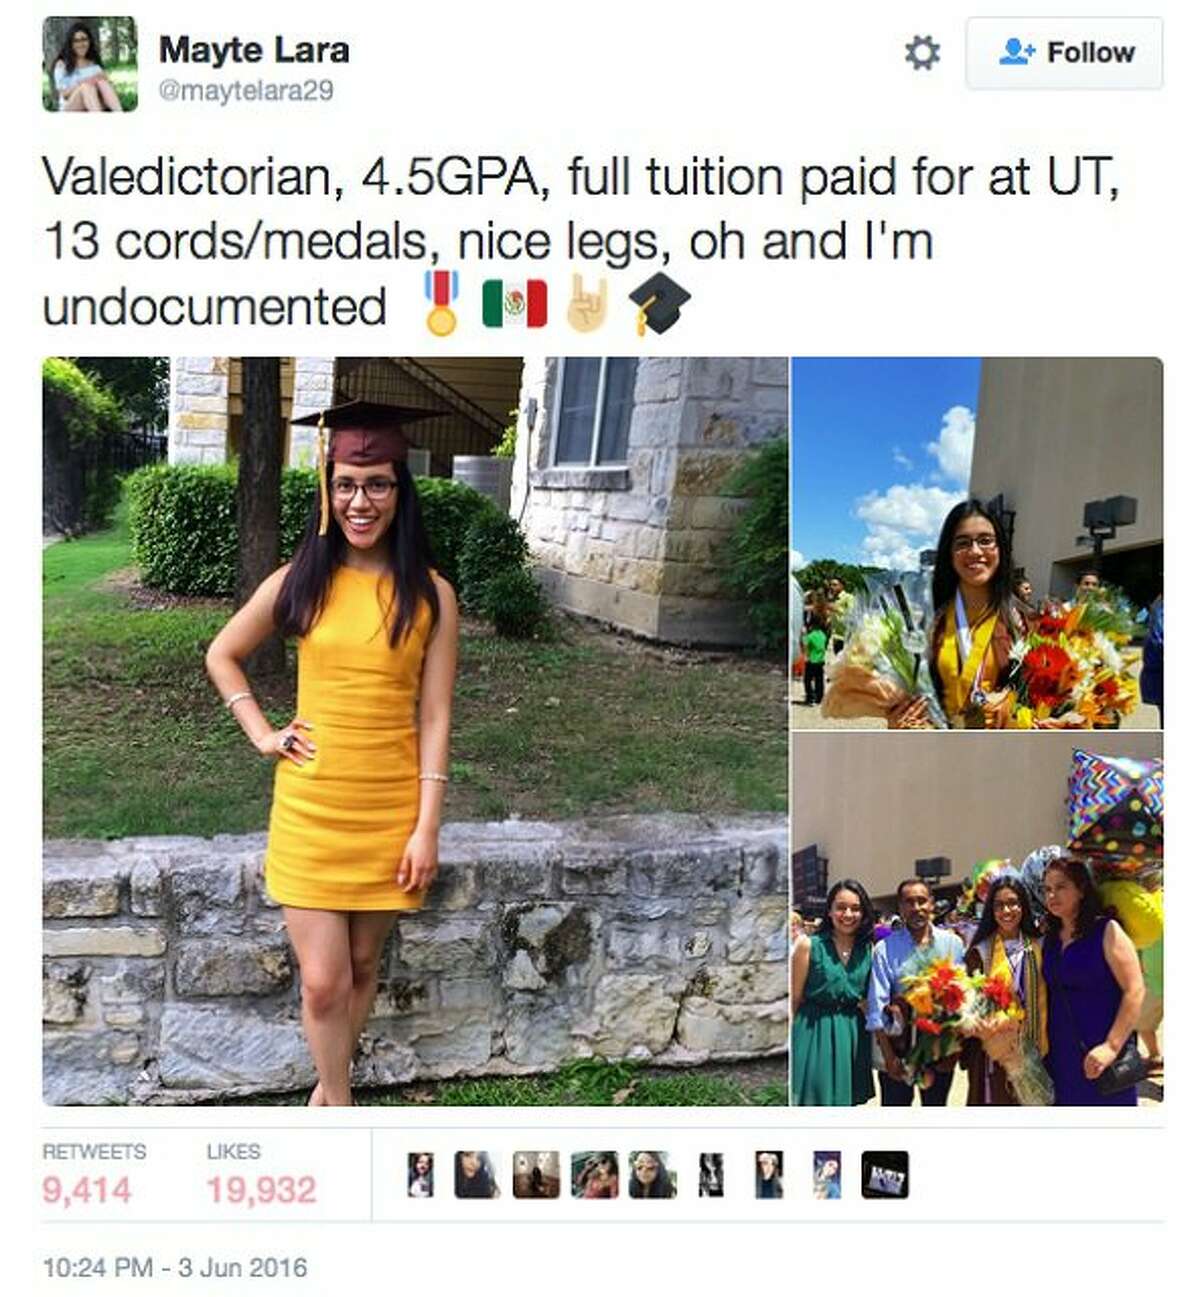 Mayte Lara, Crockett High School's valedictorian came under fire for a tweet that mentioned her status as an undocumented resident of the United States.